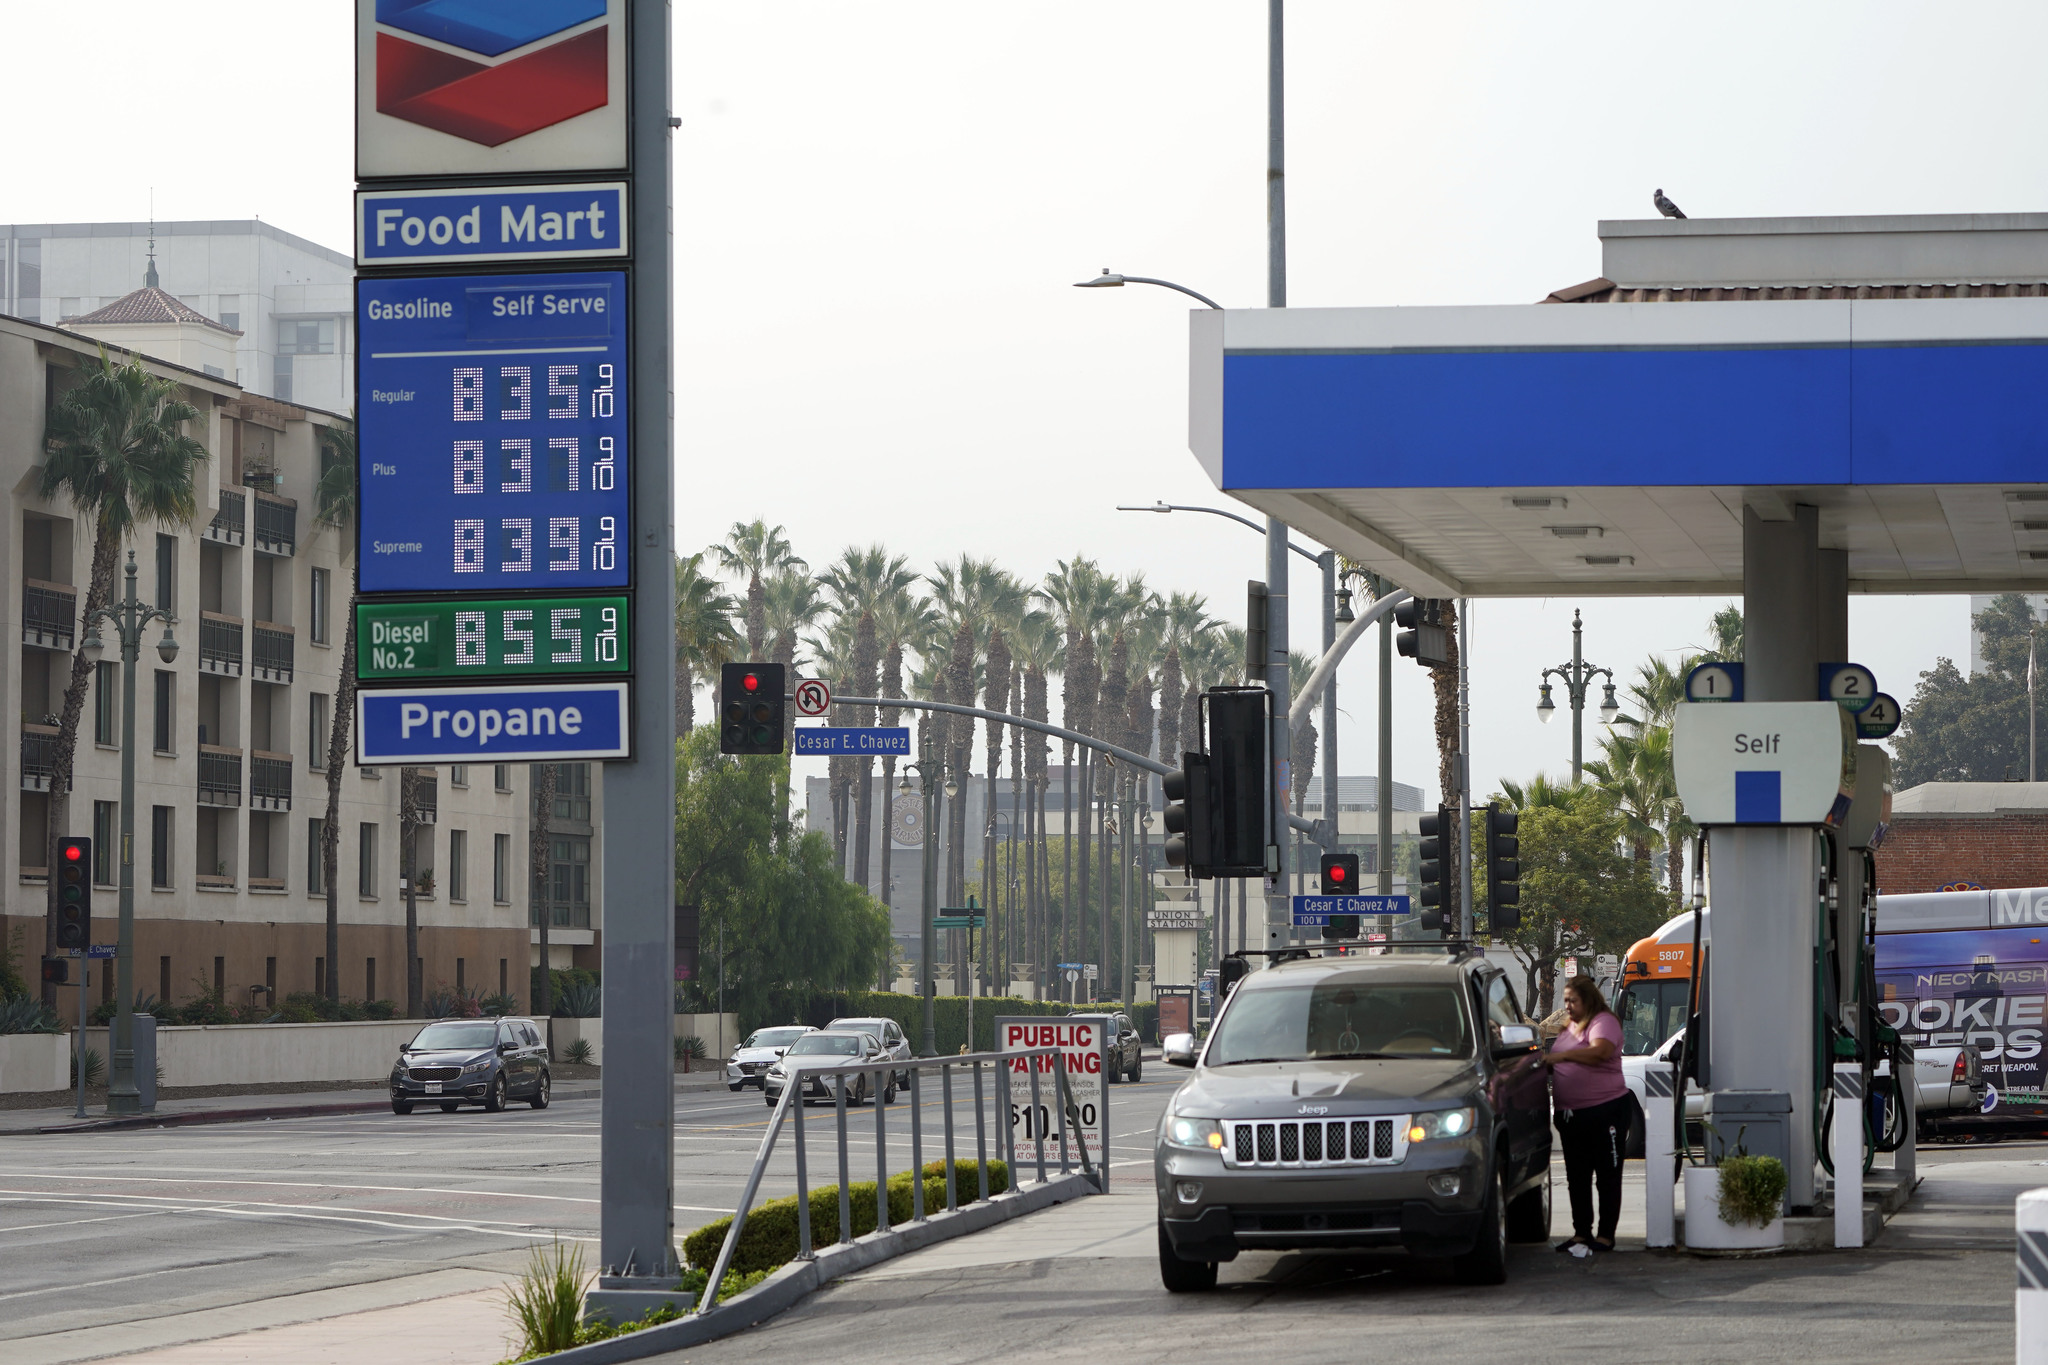 Gas prices on display at a station.